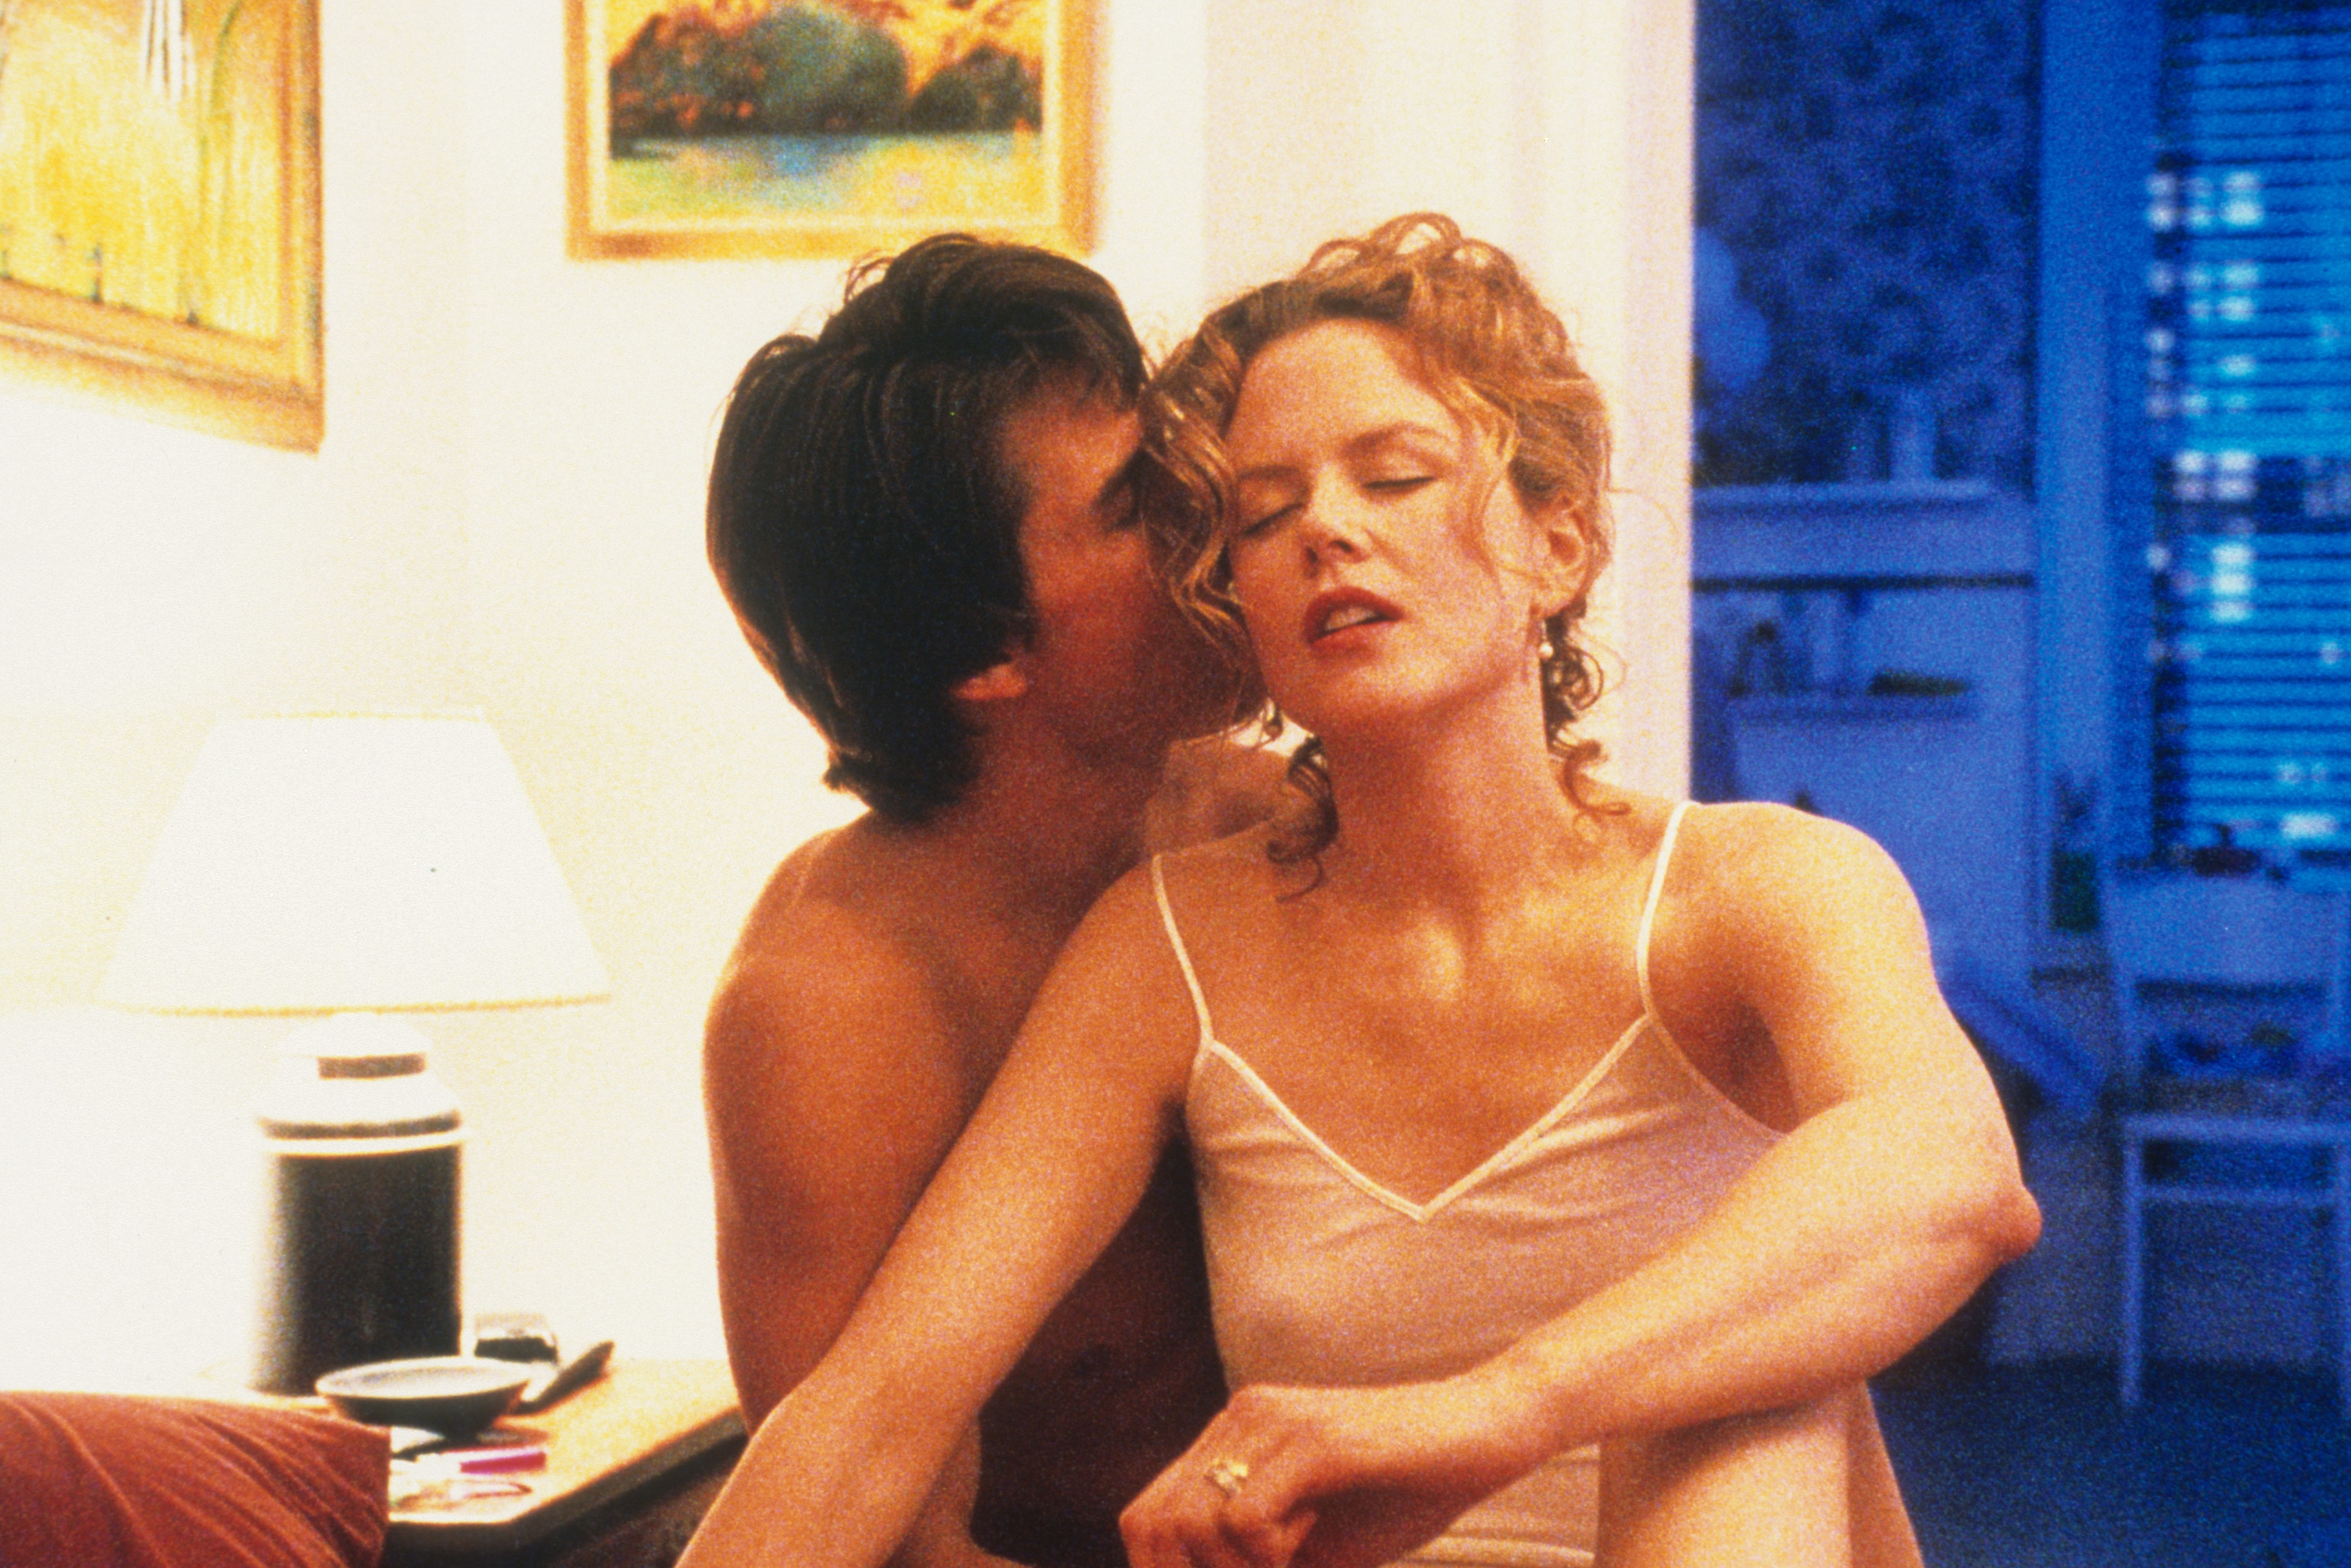 Tom Cruise kissing Nicole Kidman in a scene from the film 'Eyes Wide Shut', 1999 | Source: Getty Images